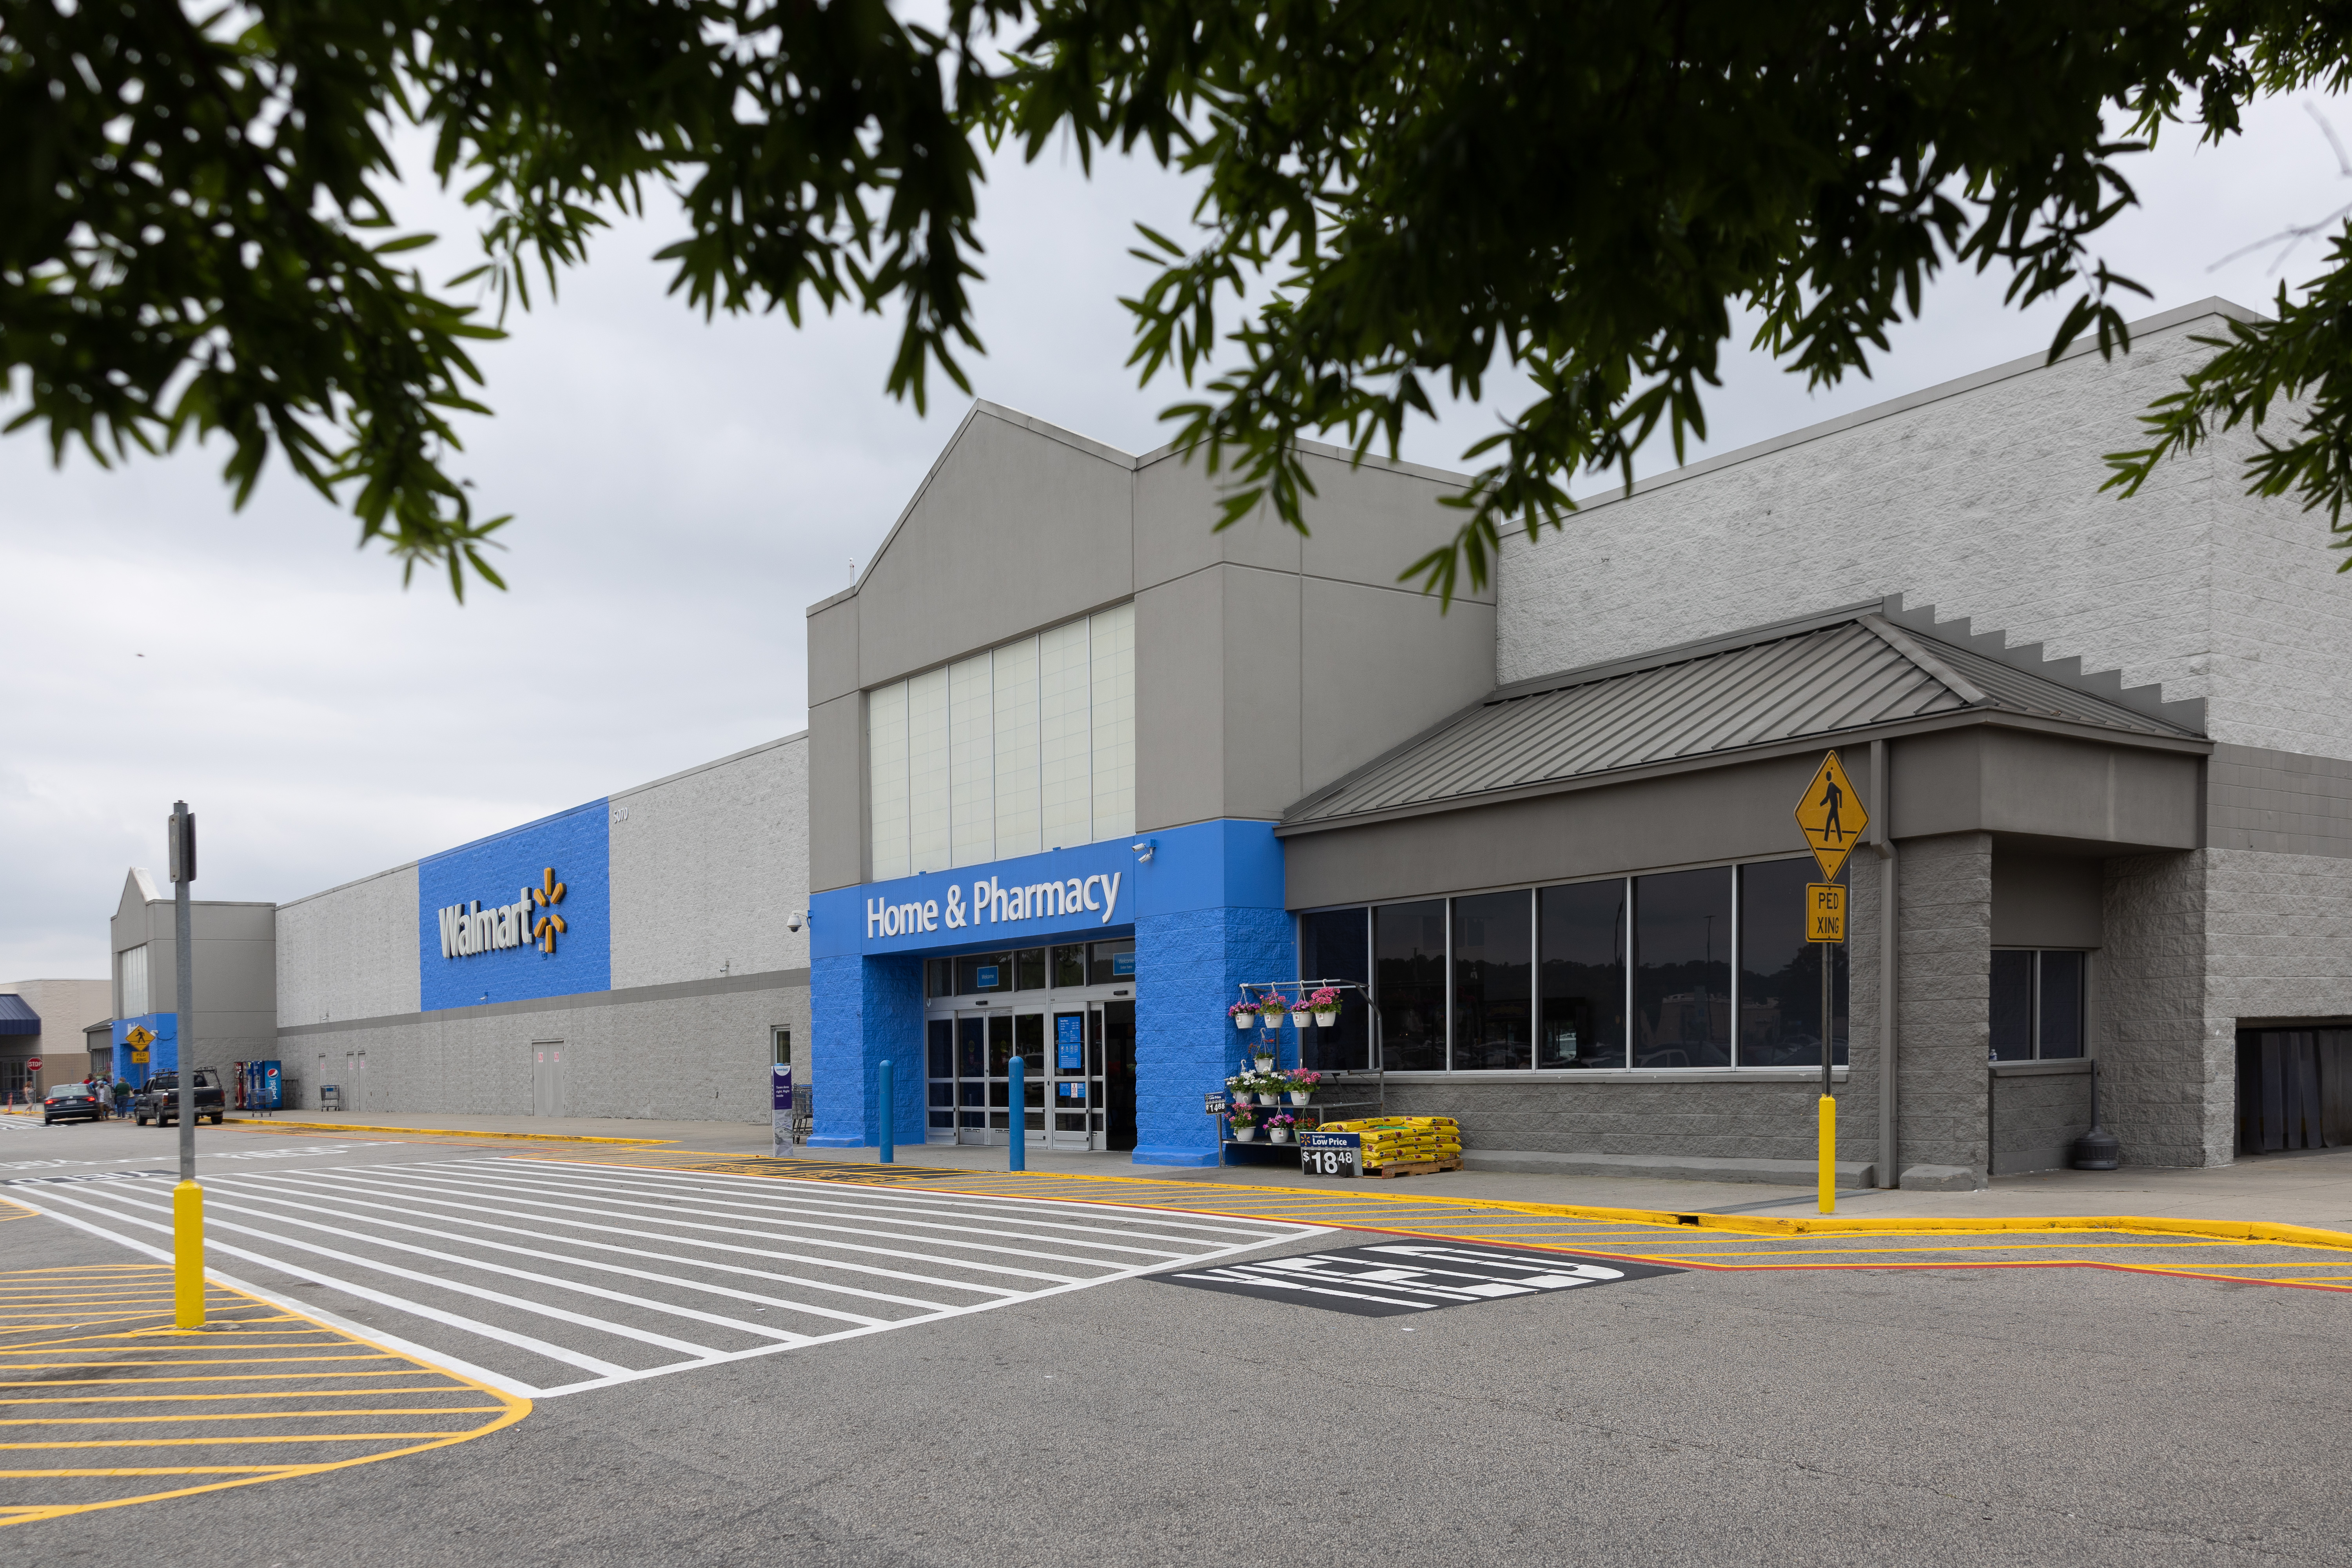 https://www.unchealth.org/content/dam/unchealth/images/locations/The-Clinic-at-Walmart-Operated-by-UNC-PN-LLC.jpg